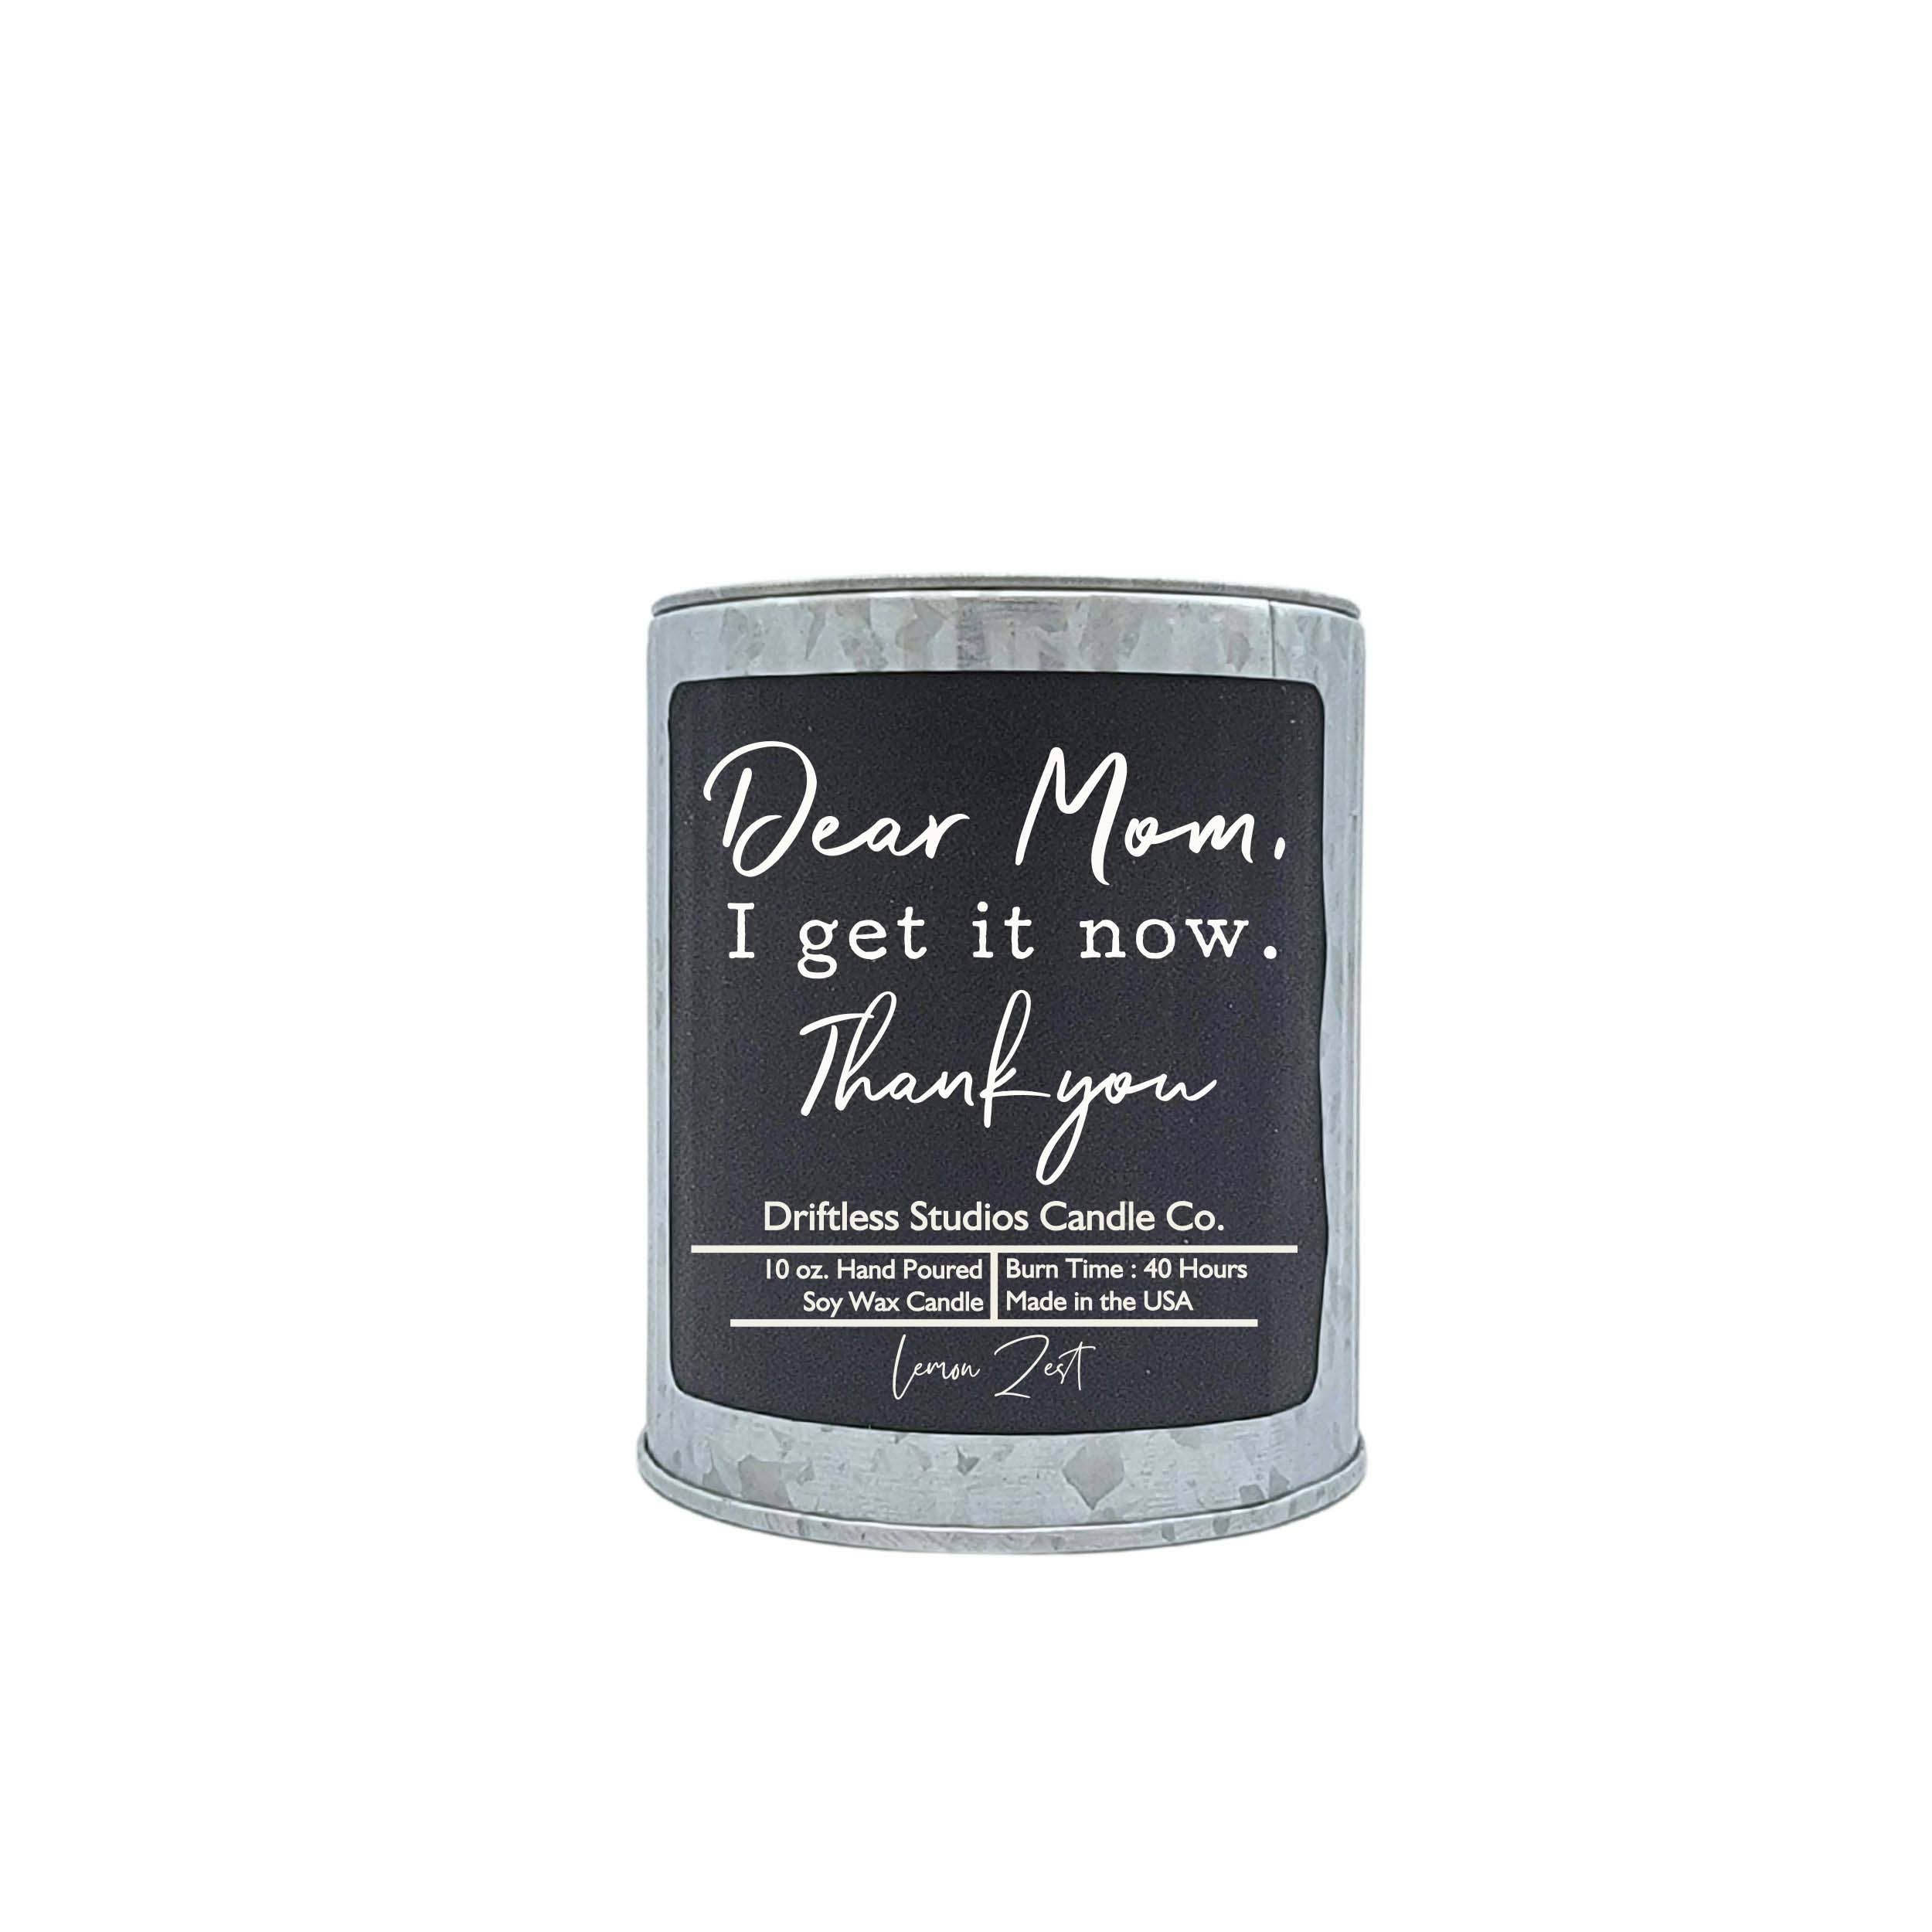 Dear Mom I Get It Now - Mother's Day Candles Soy Wax Candle: Lemon Lavender